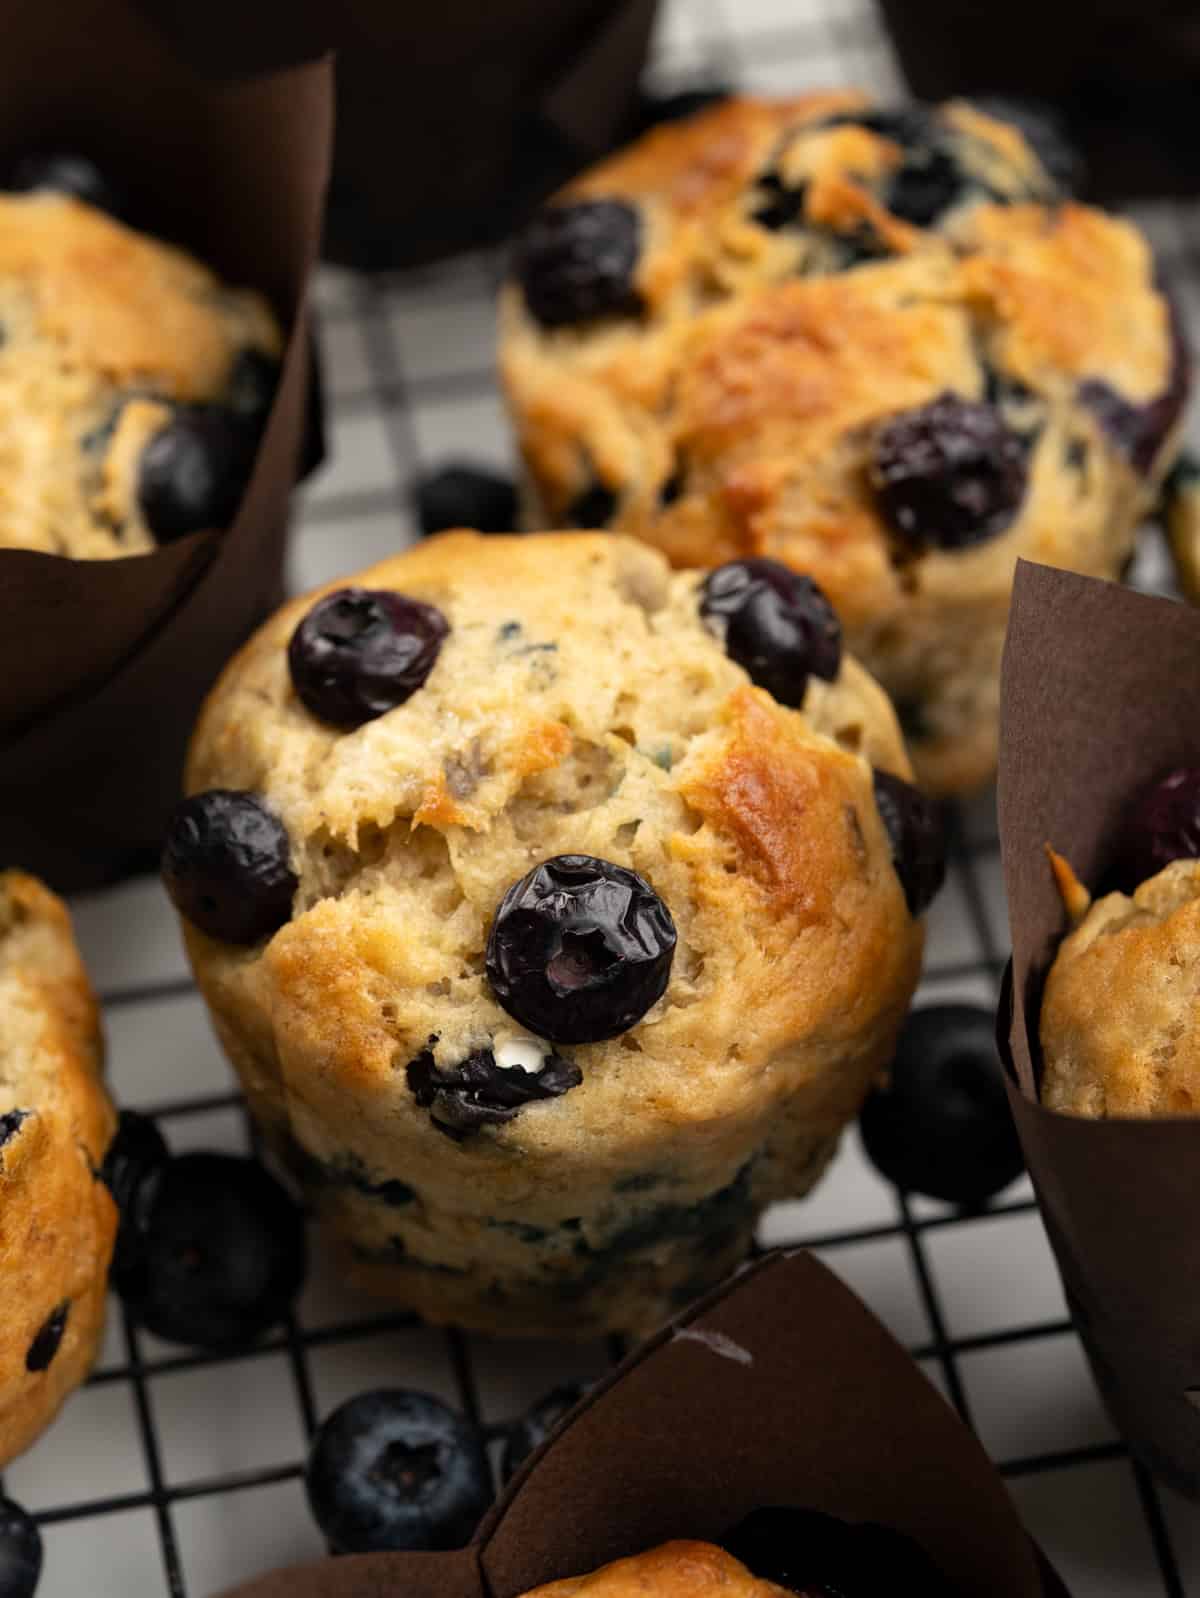 These blueberry banana muffins are soft and moist. Banana gives a natural sweetness to the tender crumbs and tiny blueberries bake into a jammy consistency. Tall bakery-style muffins with golden top will only take 30 minutes to make. 